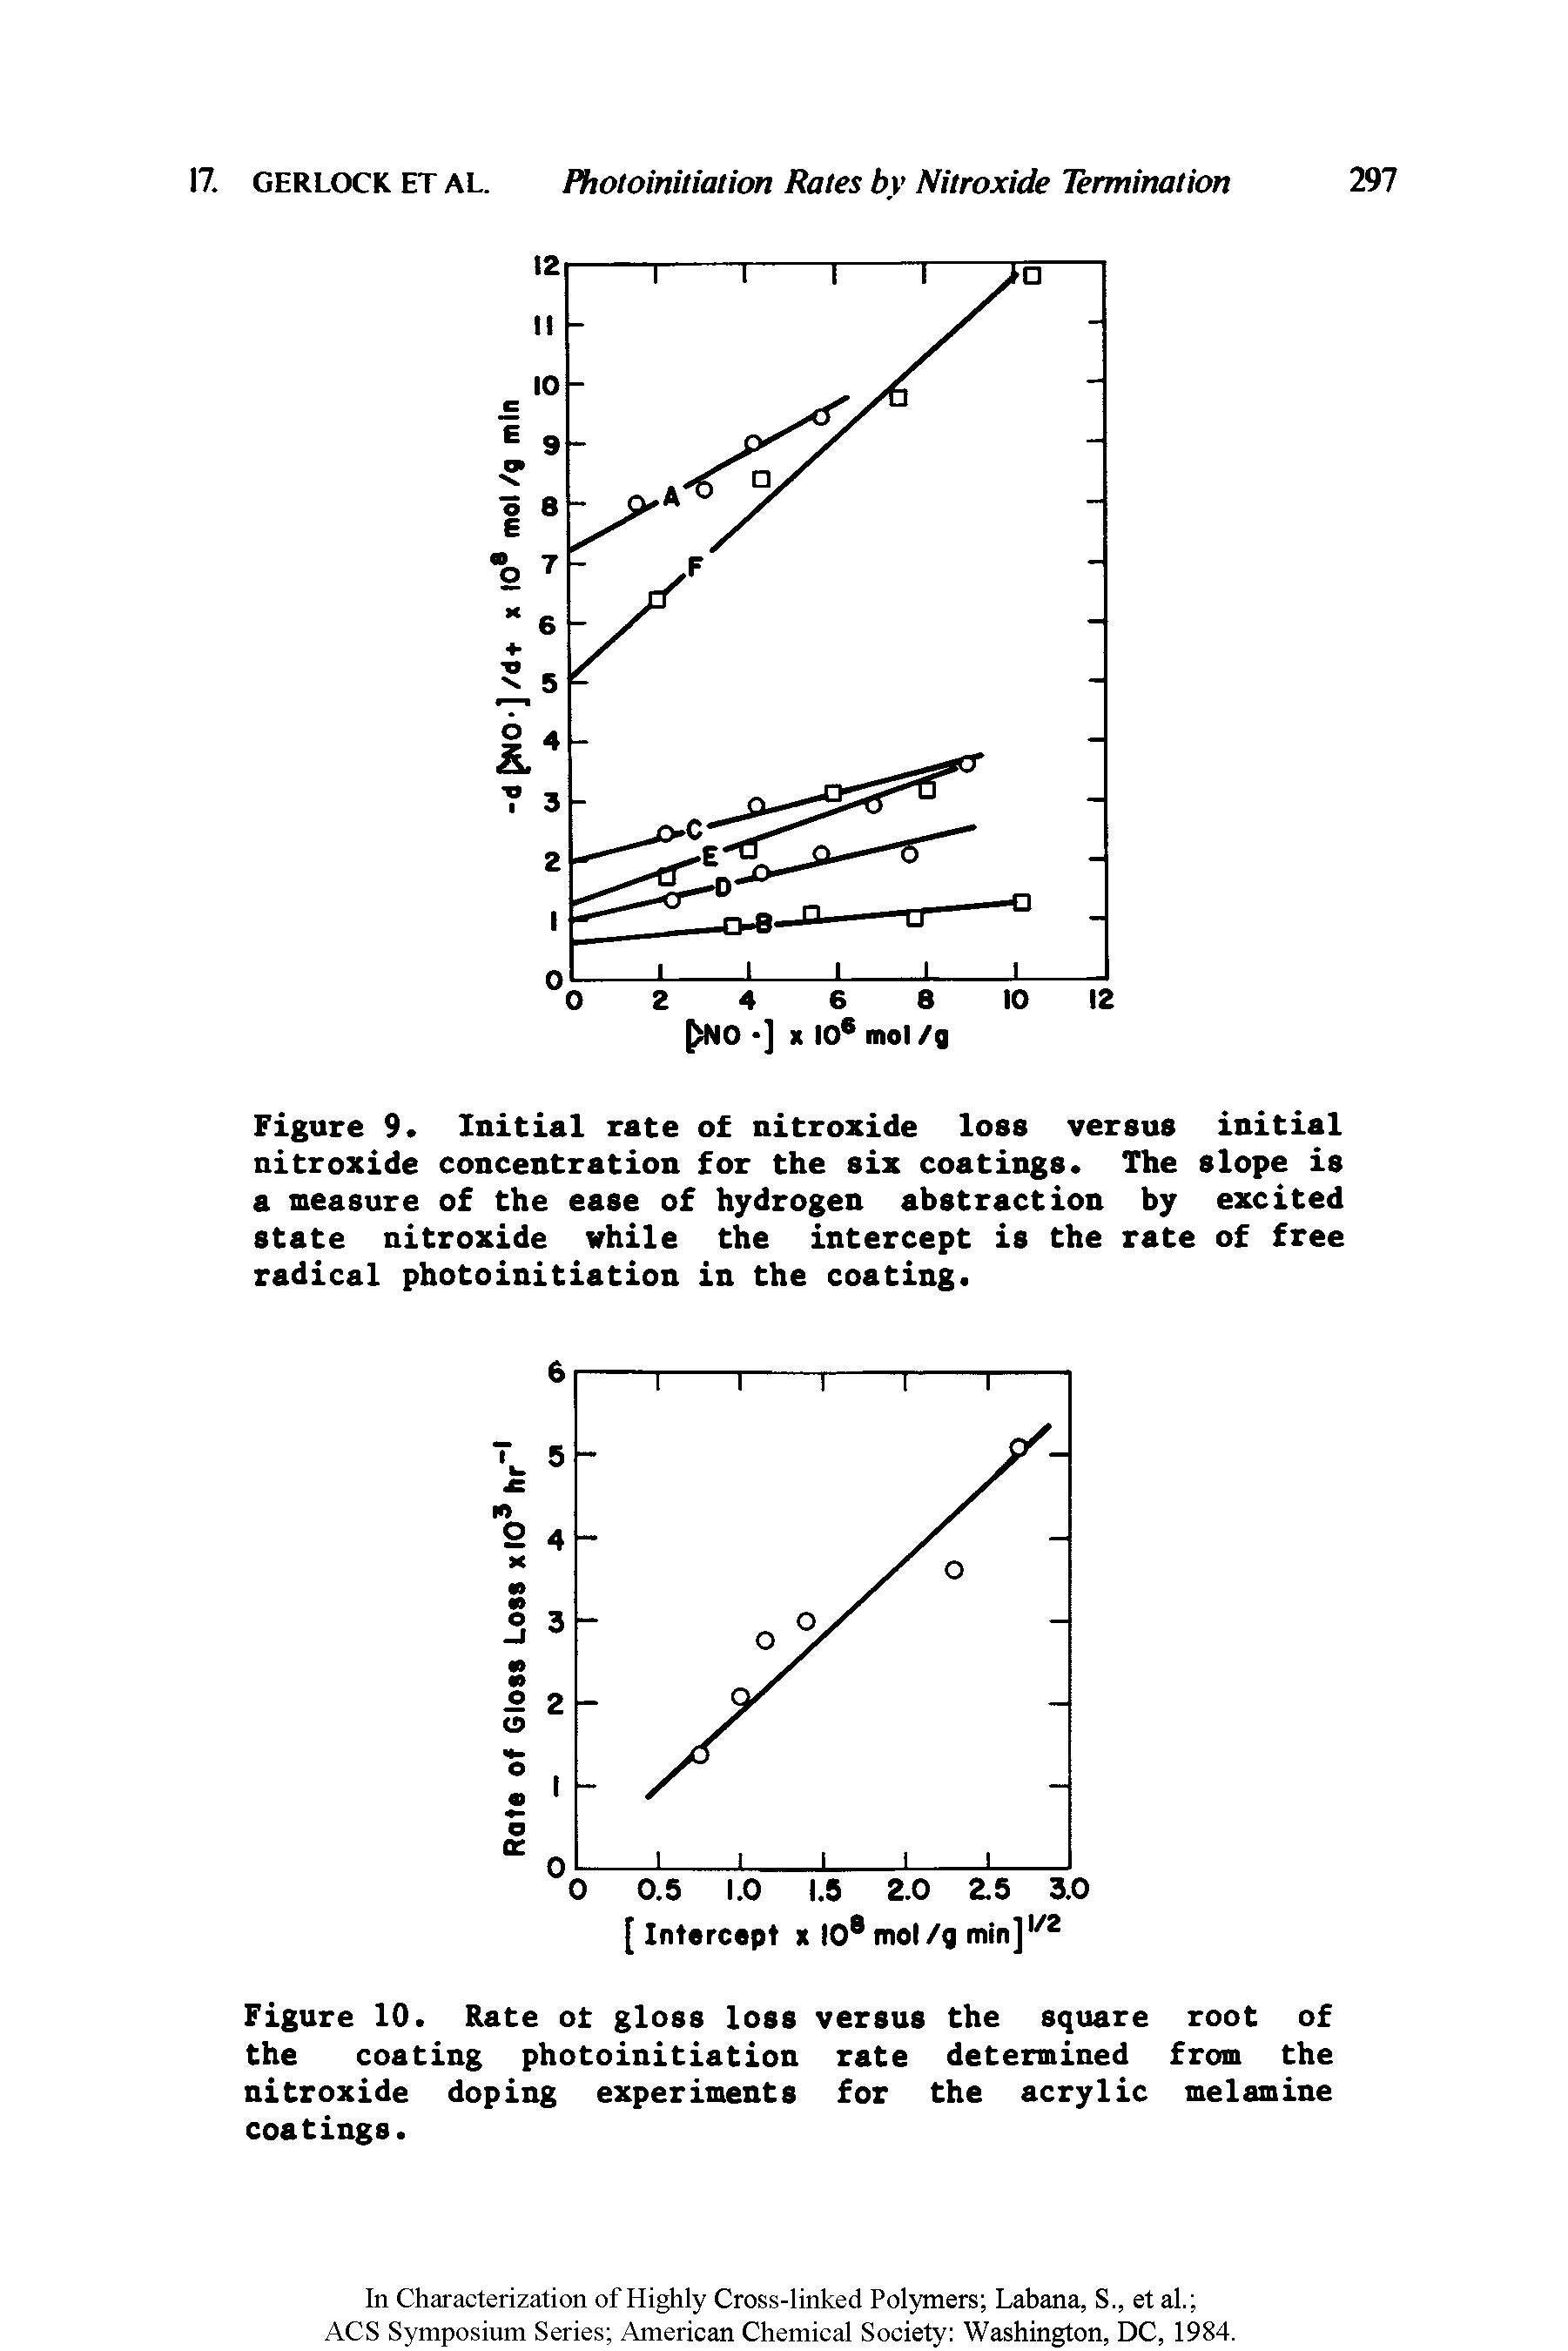 Figure 10. Rate of gloss loss versus the square root of the coating photoinitiation rate determined from the nitroxide doping experiments for the acrylic melamine coatings.